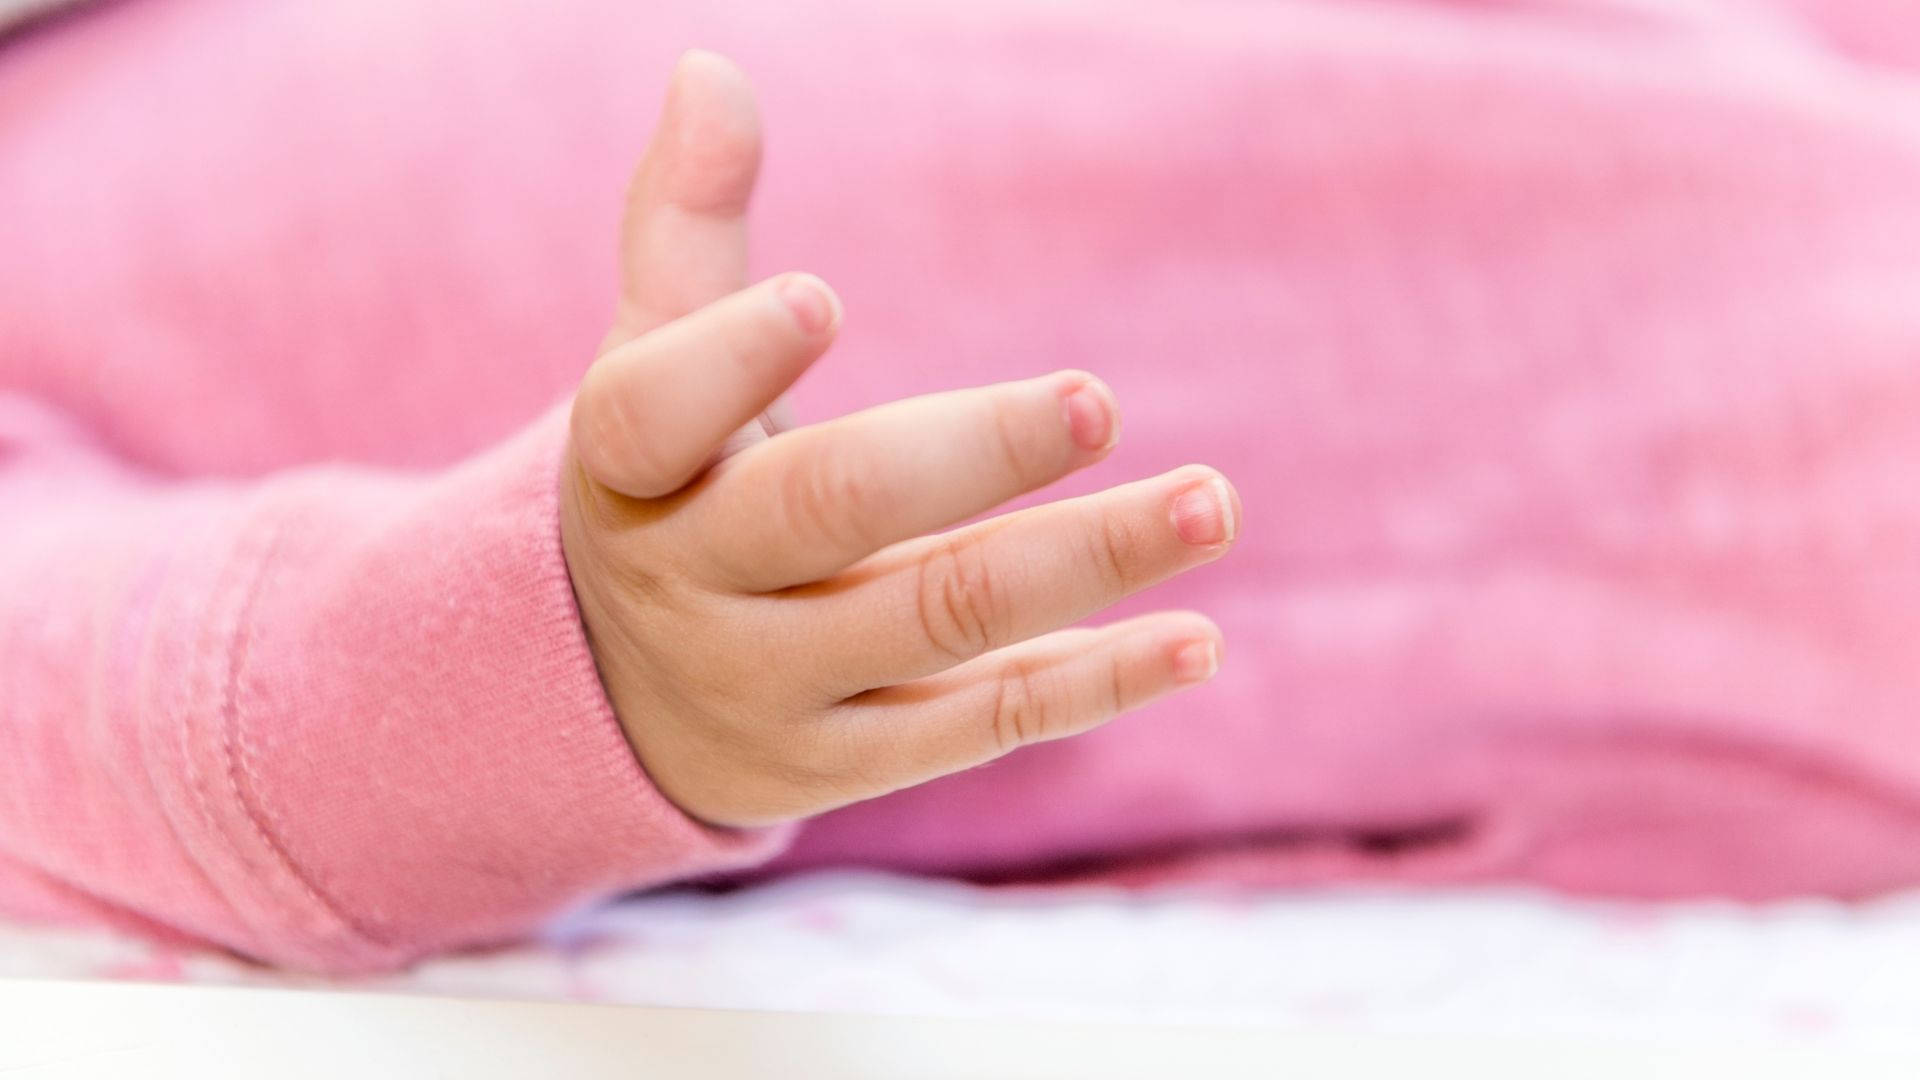 An Adorable Baby Hand in a Pink Onesie Wallpaper